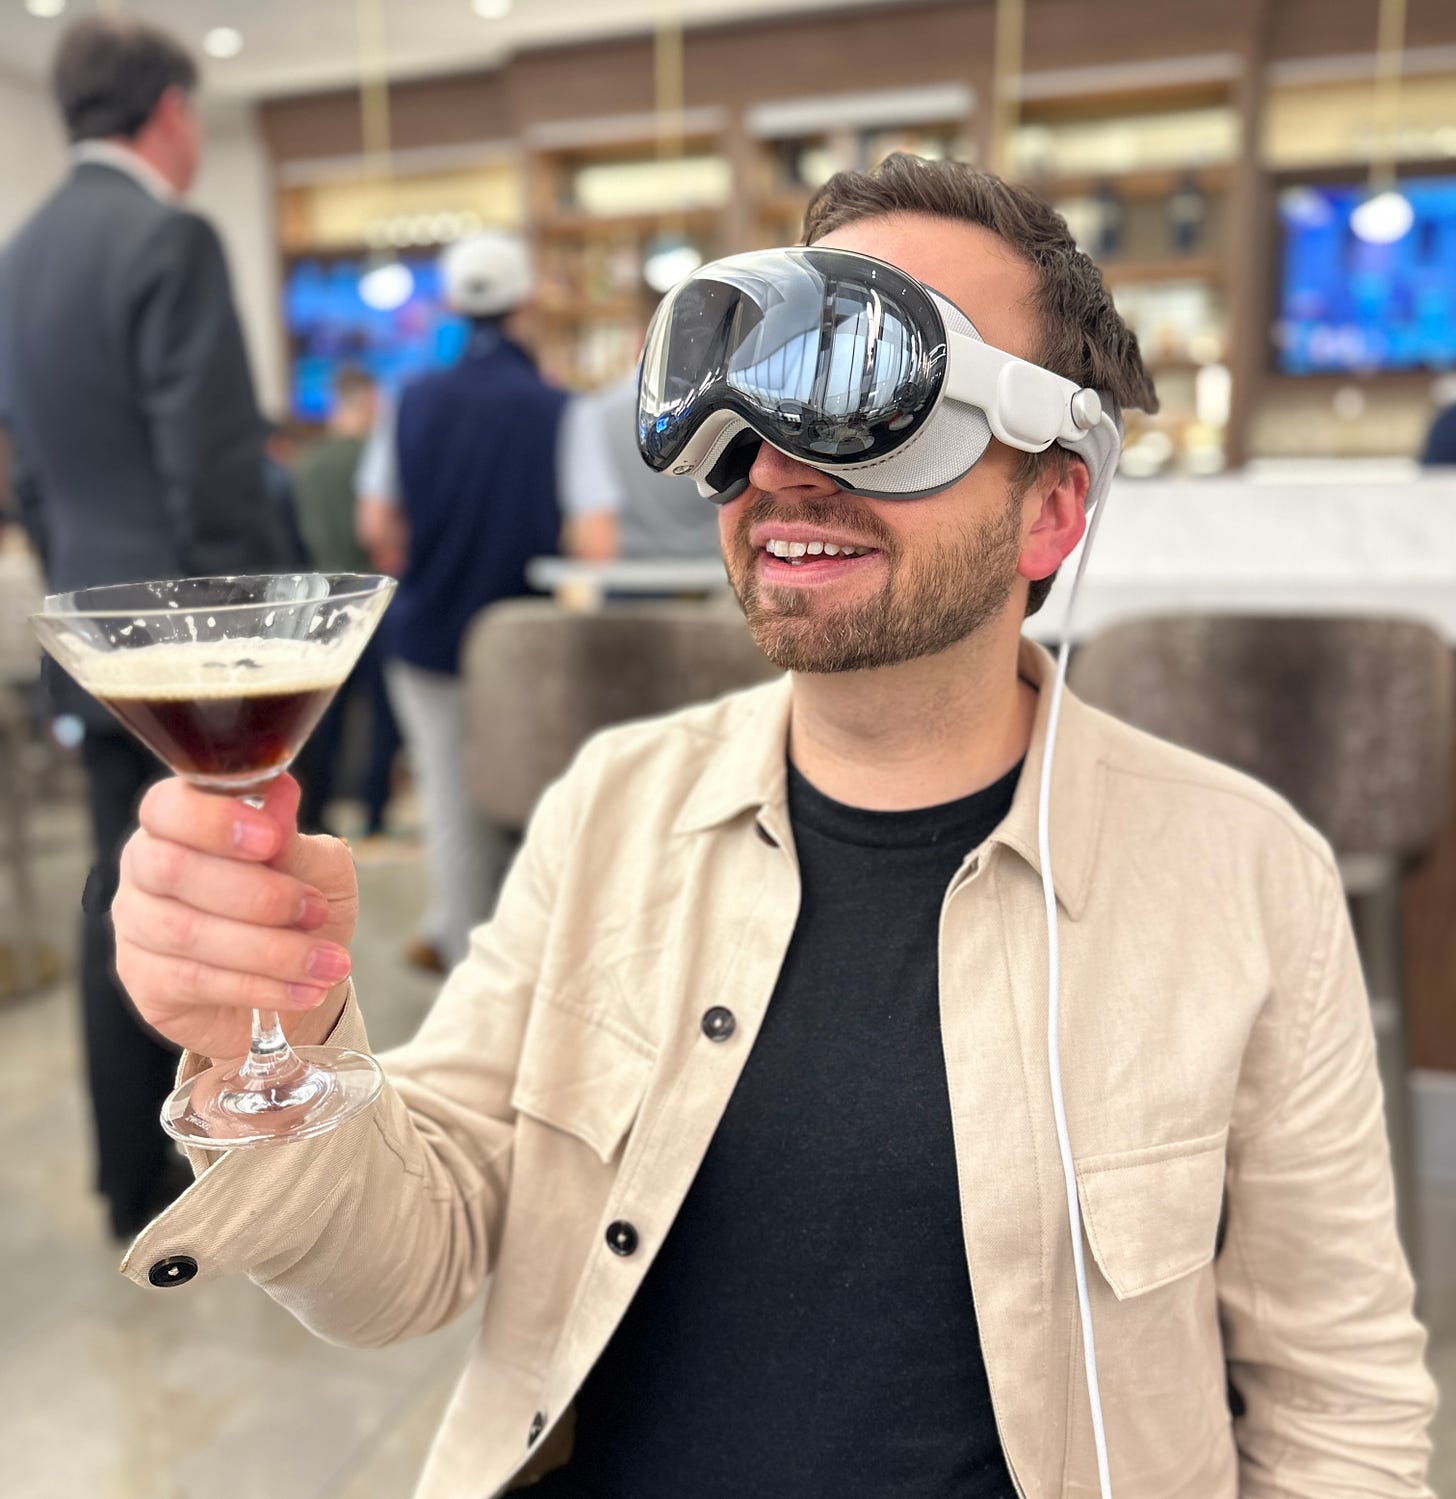 Matt Swider with Apple Vision Pro headset with a drink in hand